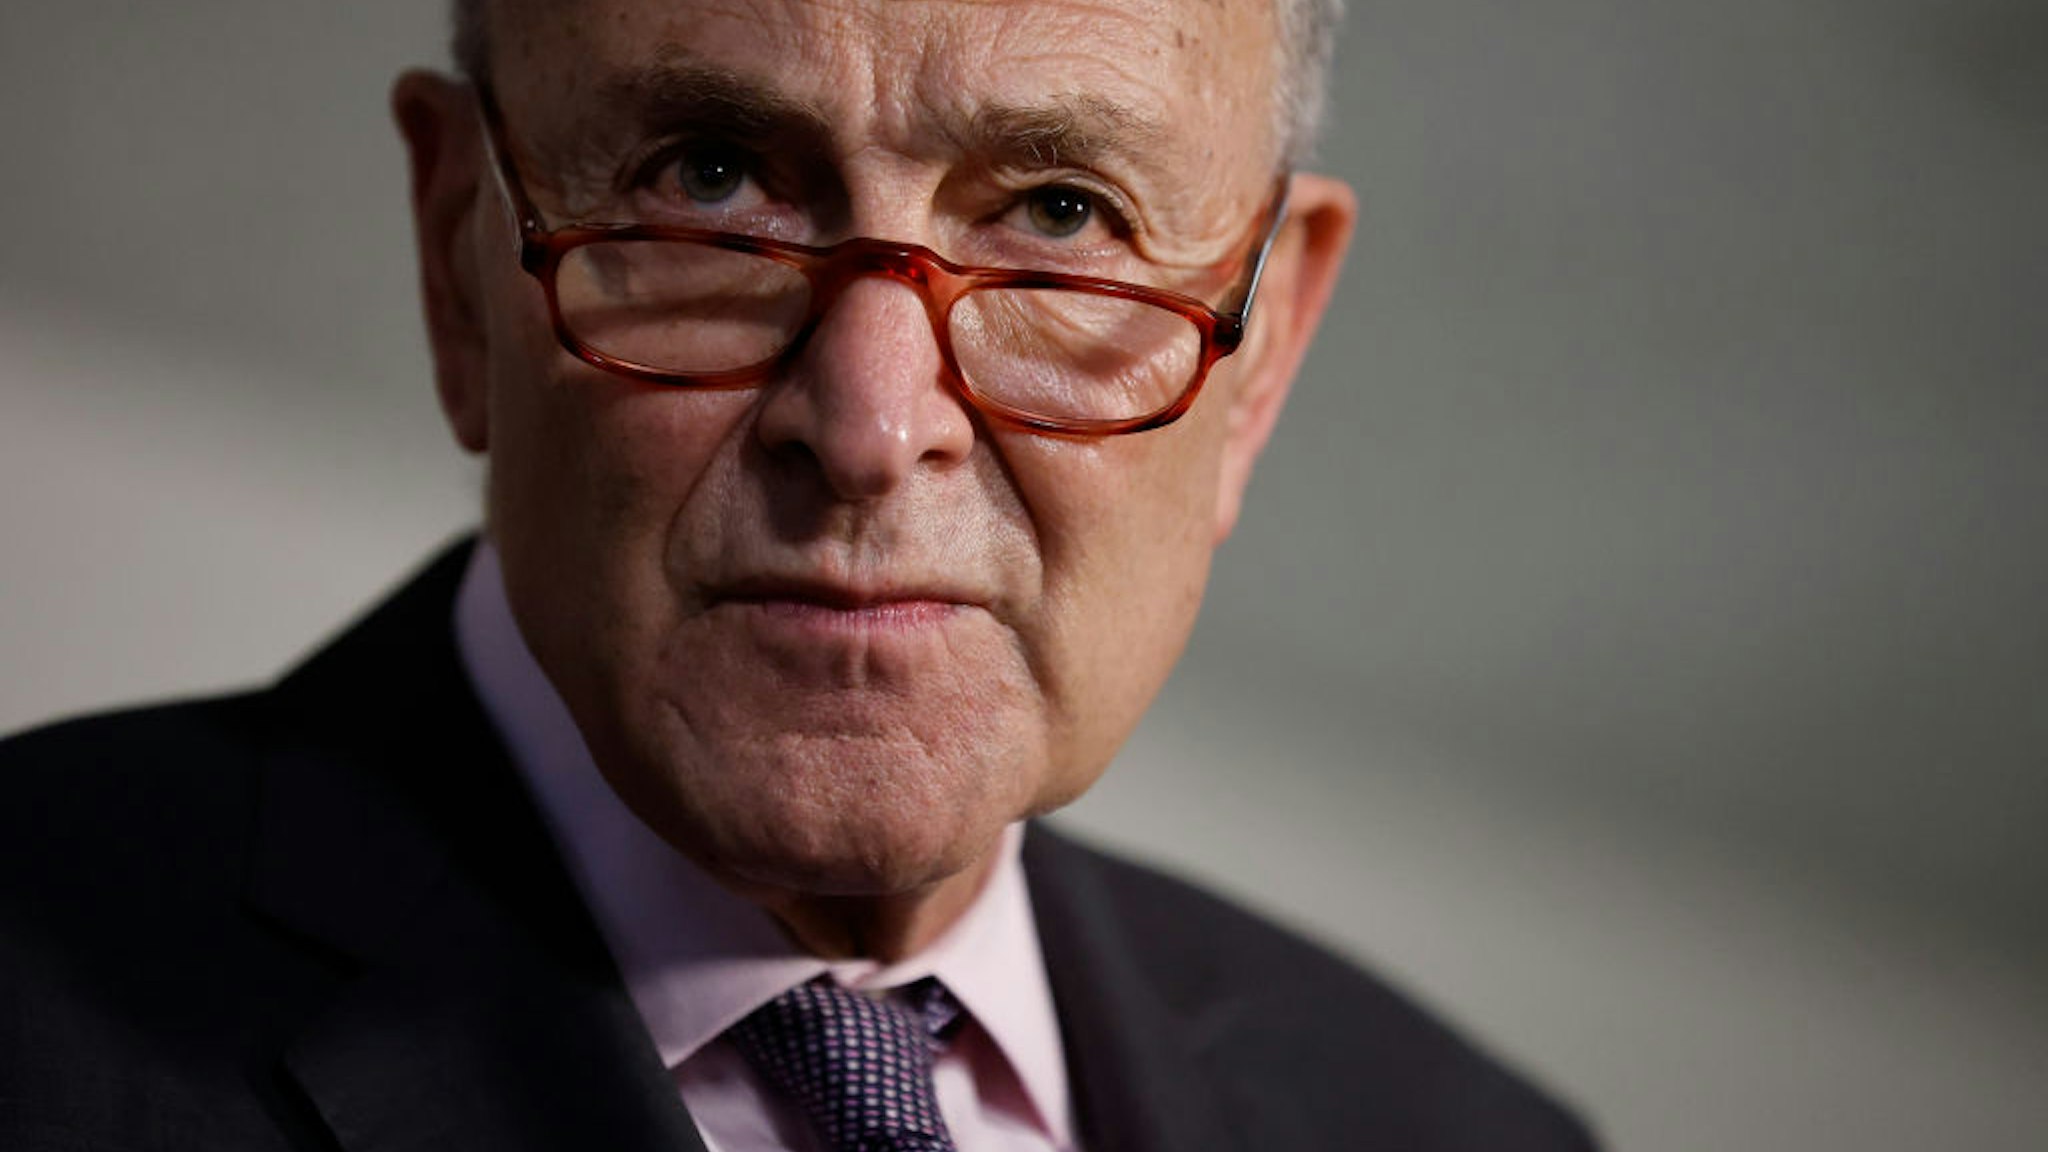 Senate Majority Leader Charles Schumer (D-NY) talks to reporters following the weekly Senate Democratic policy luncheon in the Hart Senate Office Building on Capitol Hill on February 01, 2022 in Washington, DC.